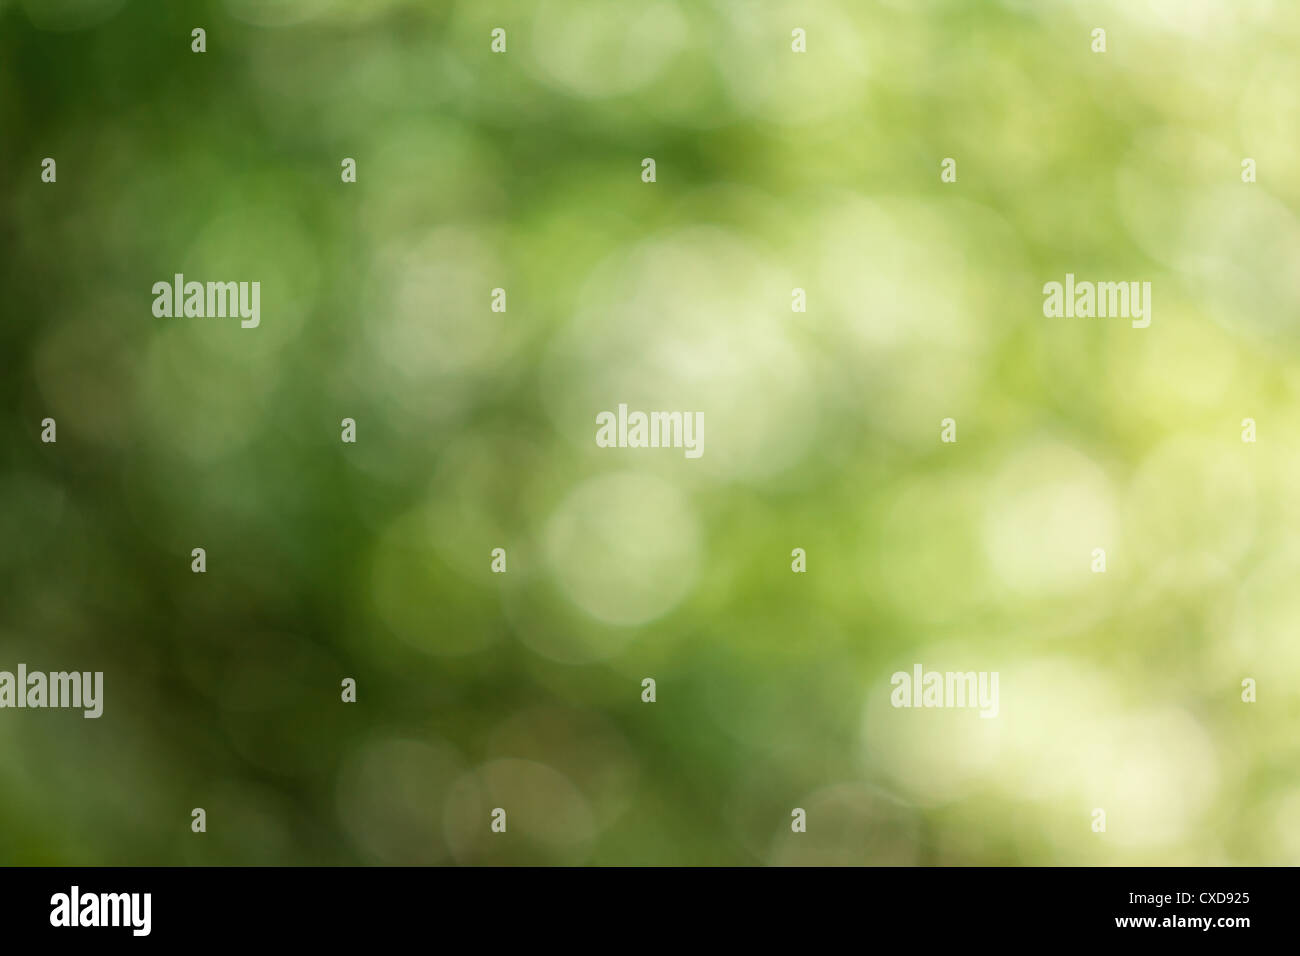 Beautifully green abstract blurred background Stock Photo